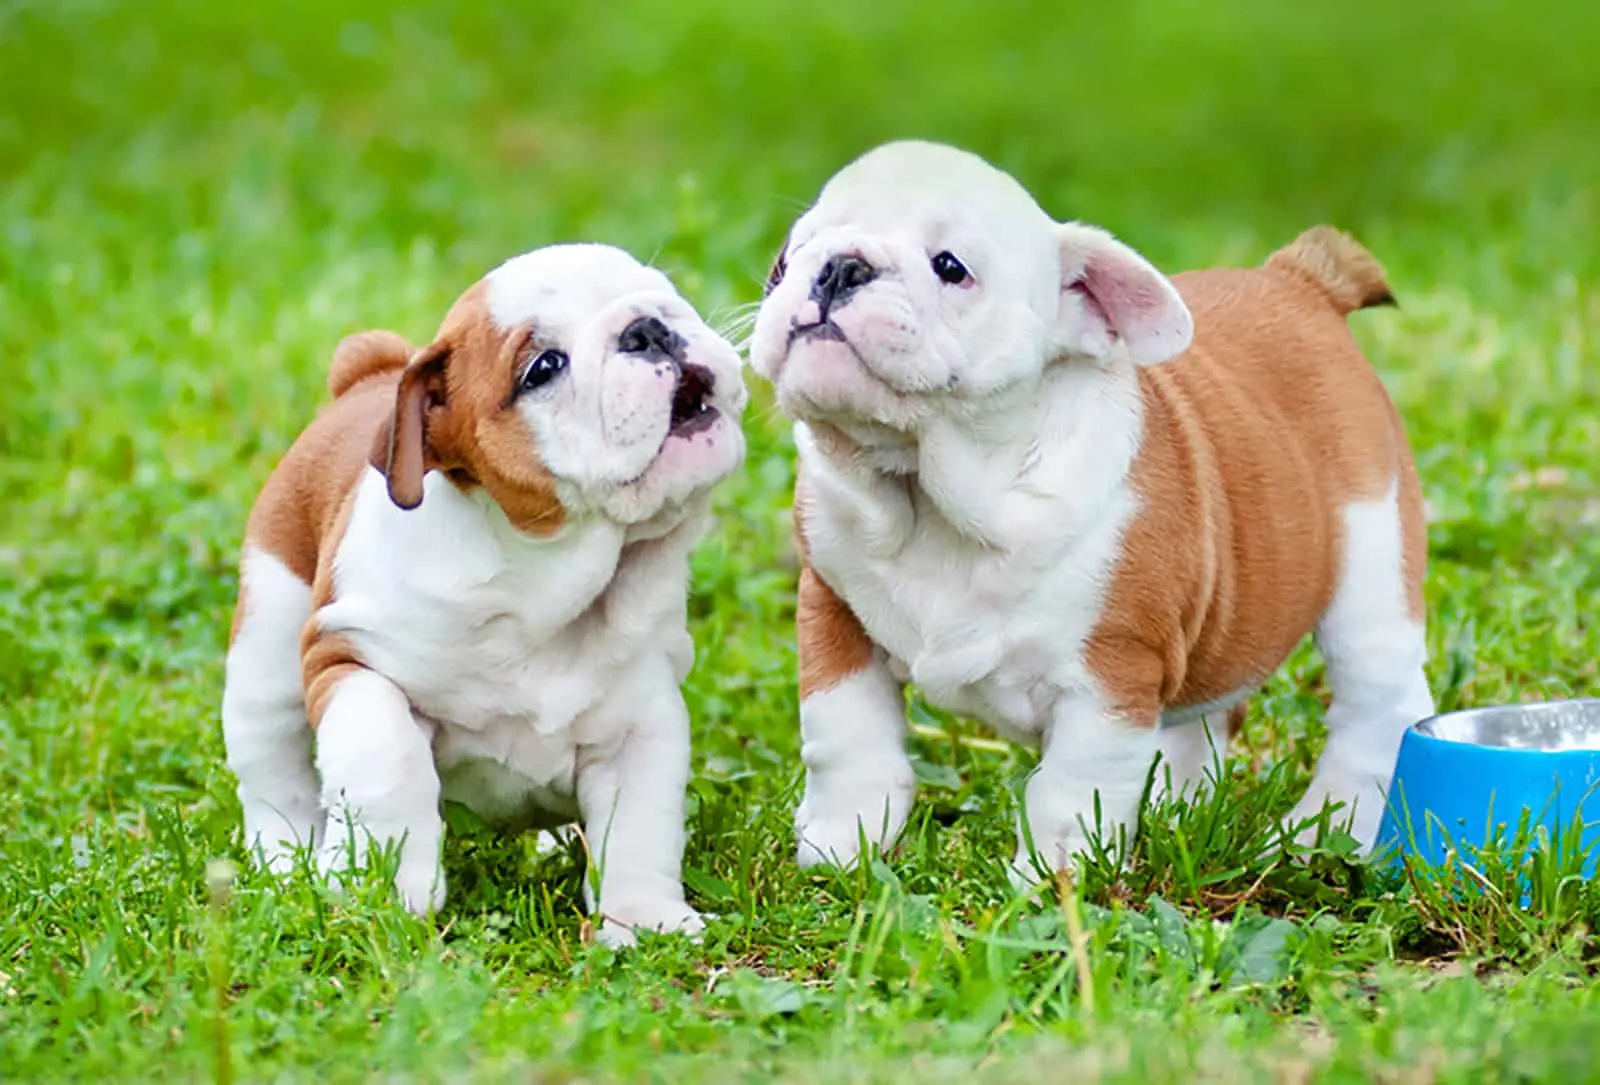 two english bulldog puppies standing beside a blue bowl